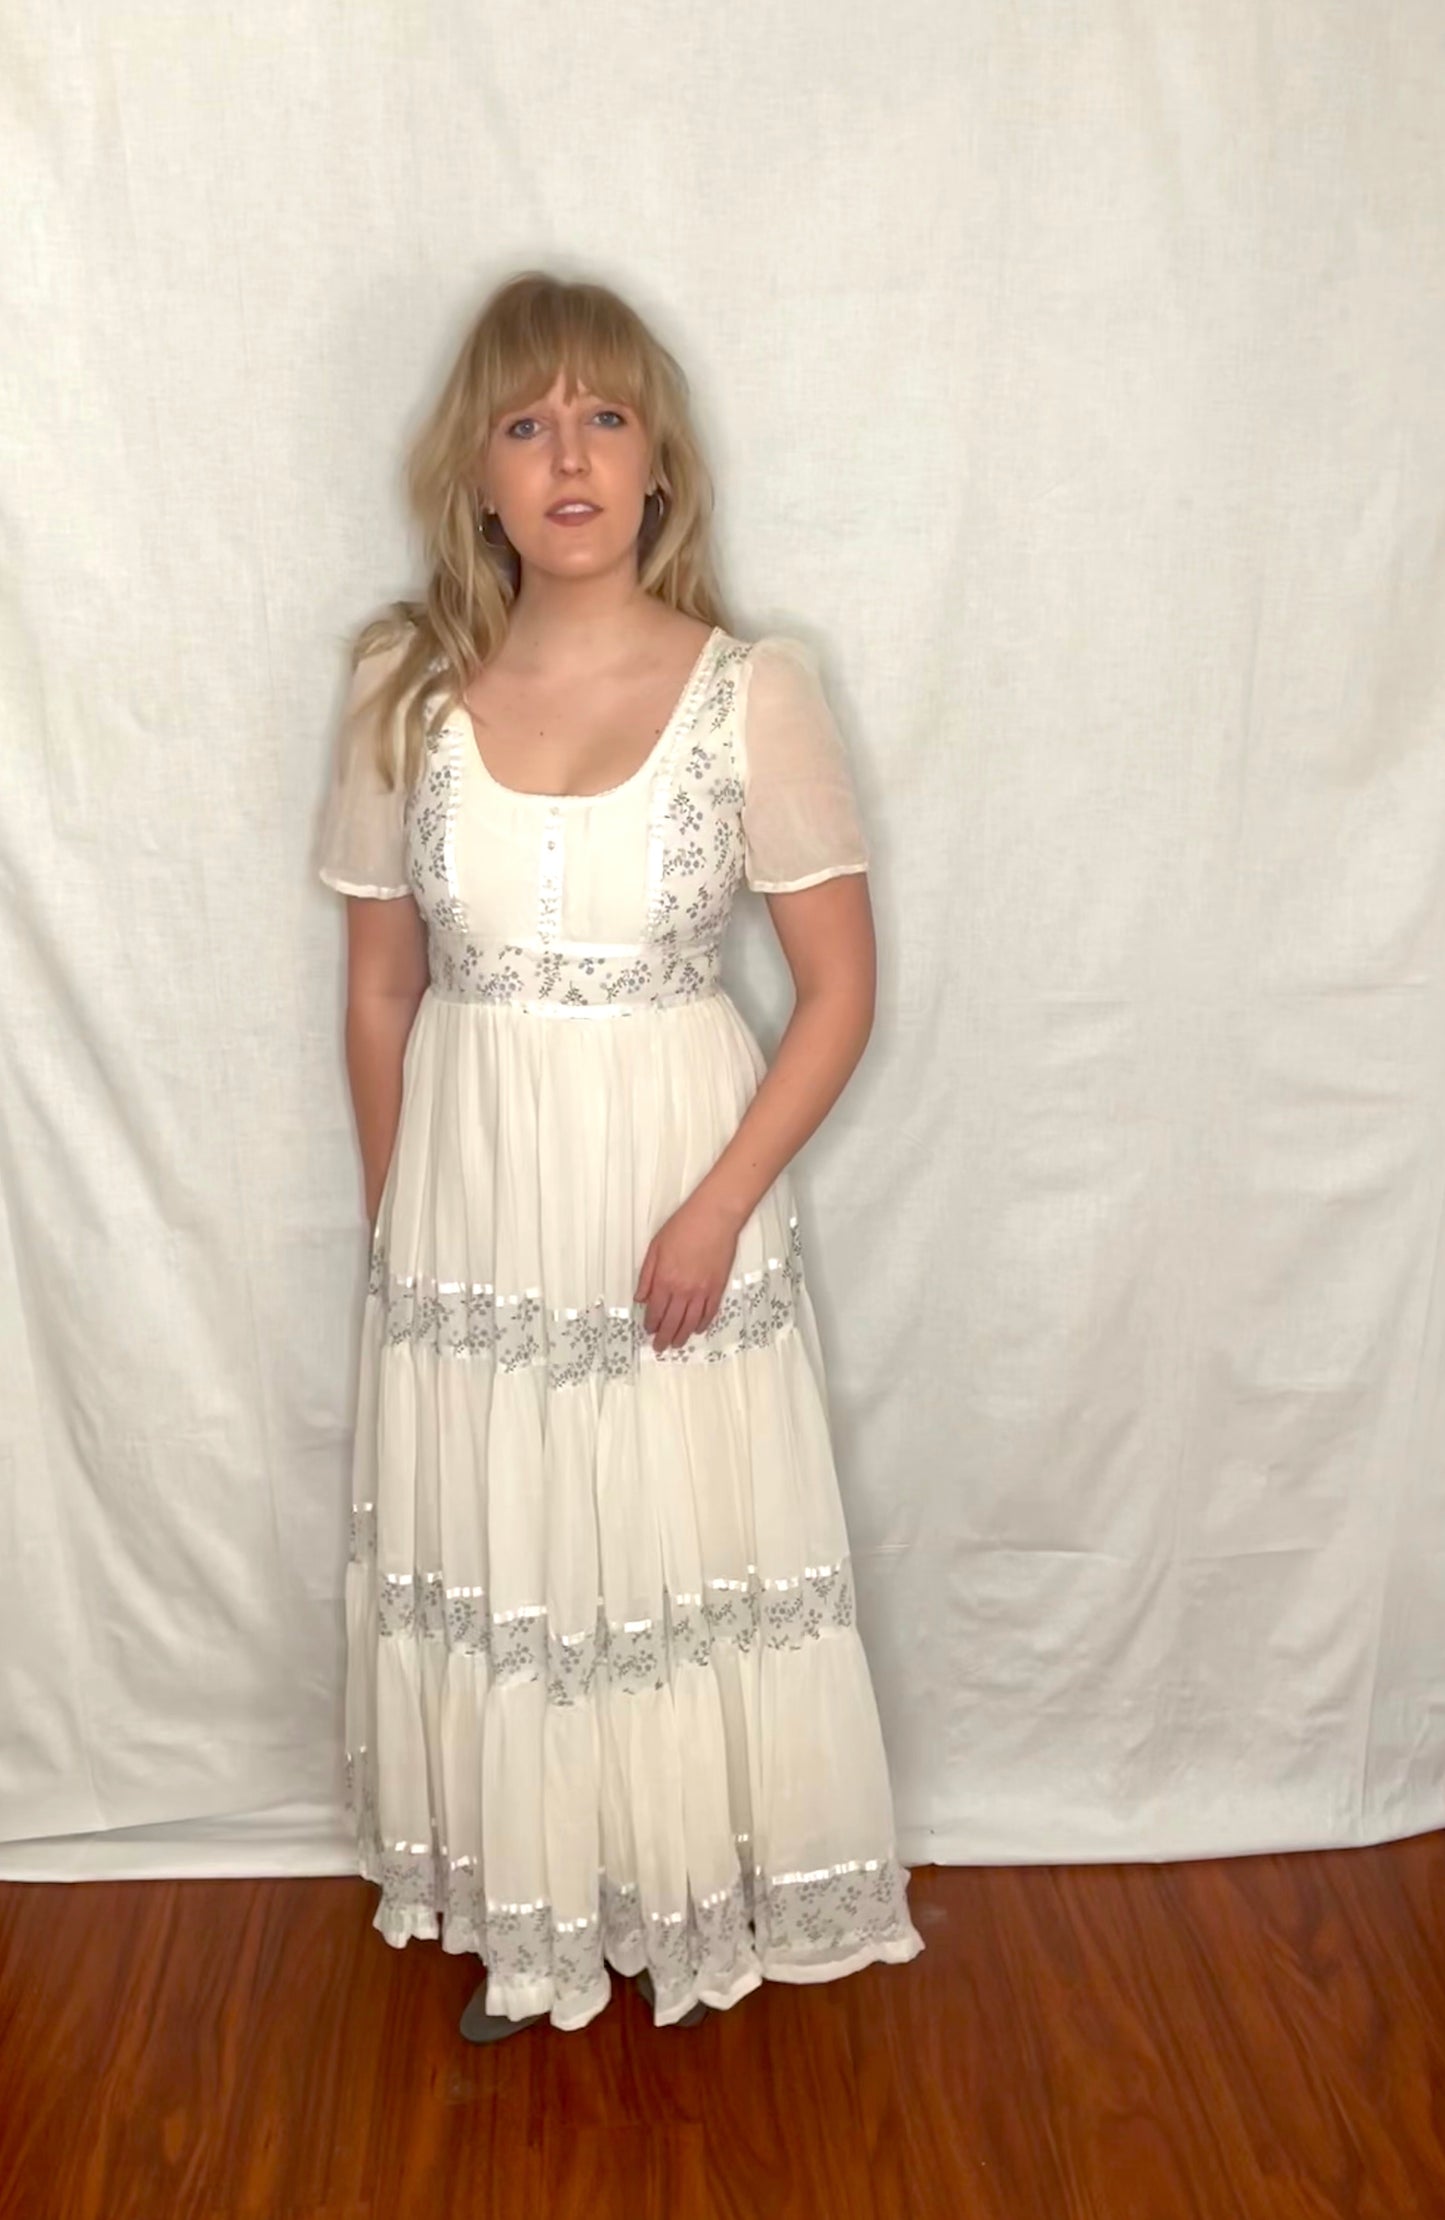 Vintage 1970’s "Gunne Sax by Jessica McClintock" White and Blue Floral Maxi Dress (Altered)